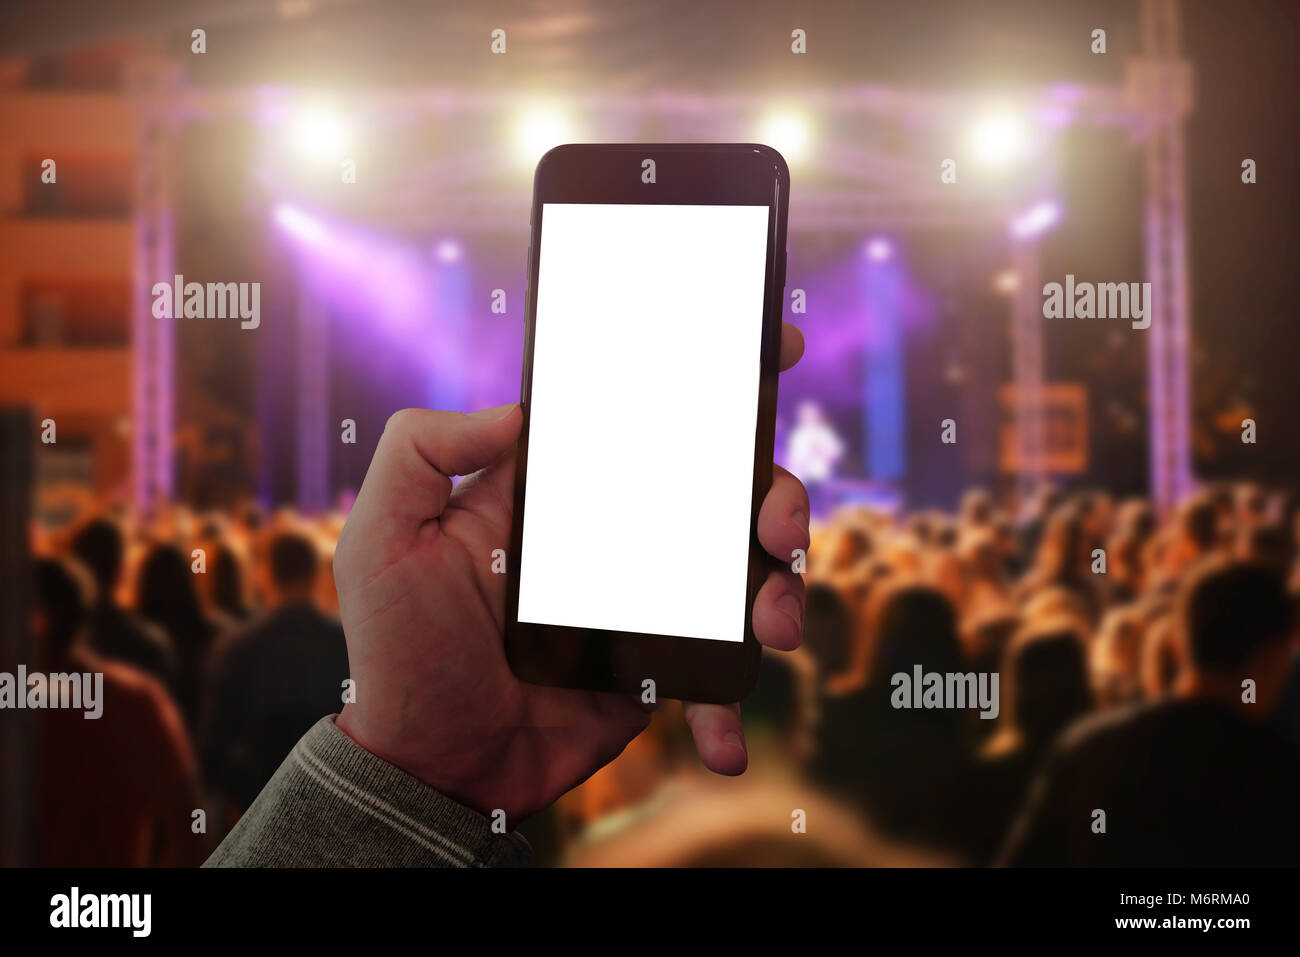 Man hand holding mobile smart phone and taking photo or video. Concert crowd and lights in background. Stock Photo